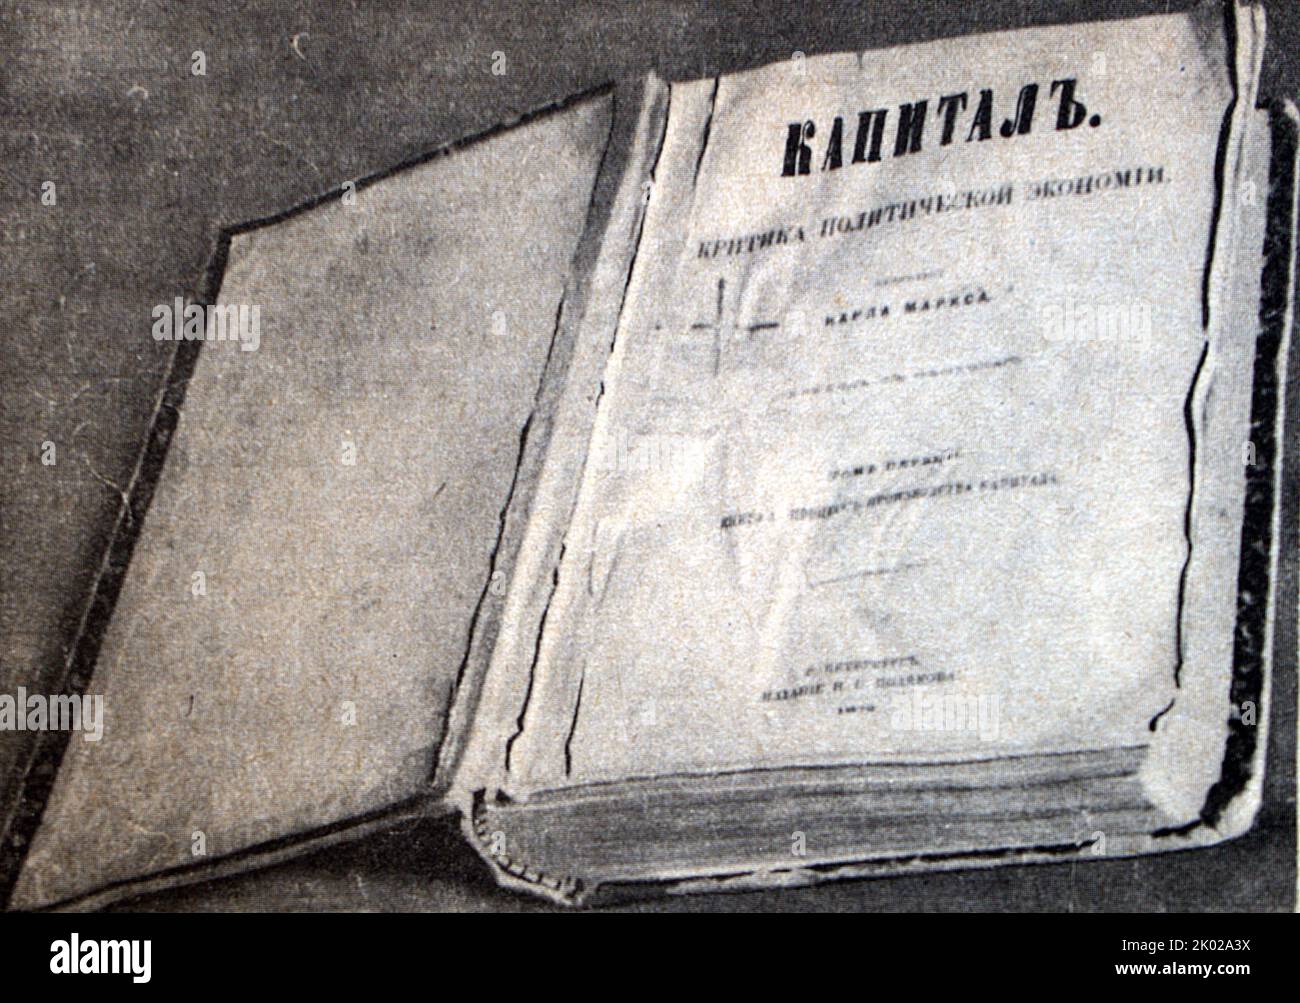 The first Russian edition of 'Capital' by K. Marx. The first translated publication of Das Kapital was in the Russian Empire in March 1872 Stock Photo